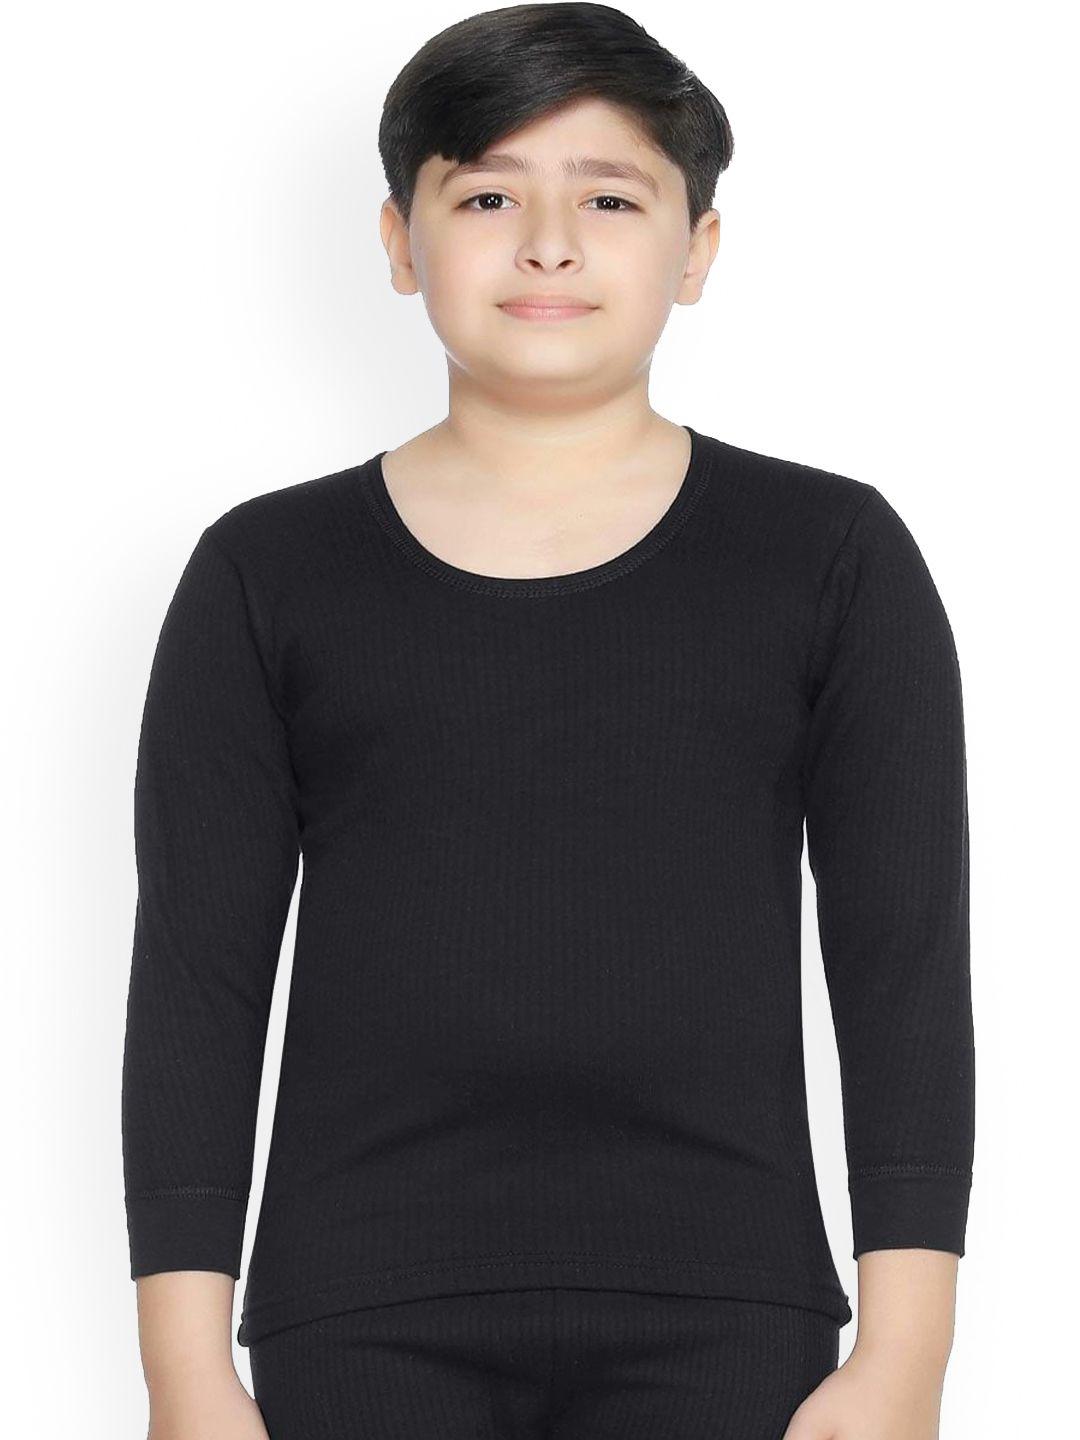 bodycare kids boys black solid cotton thermal tops